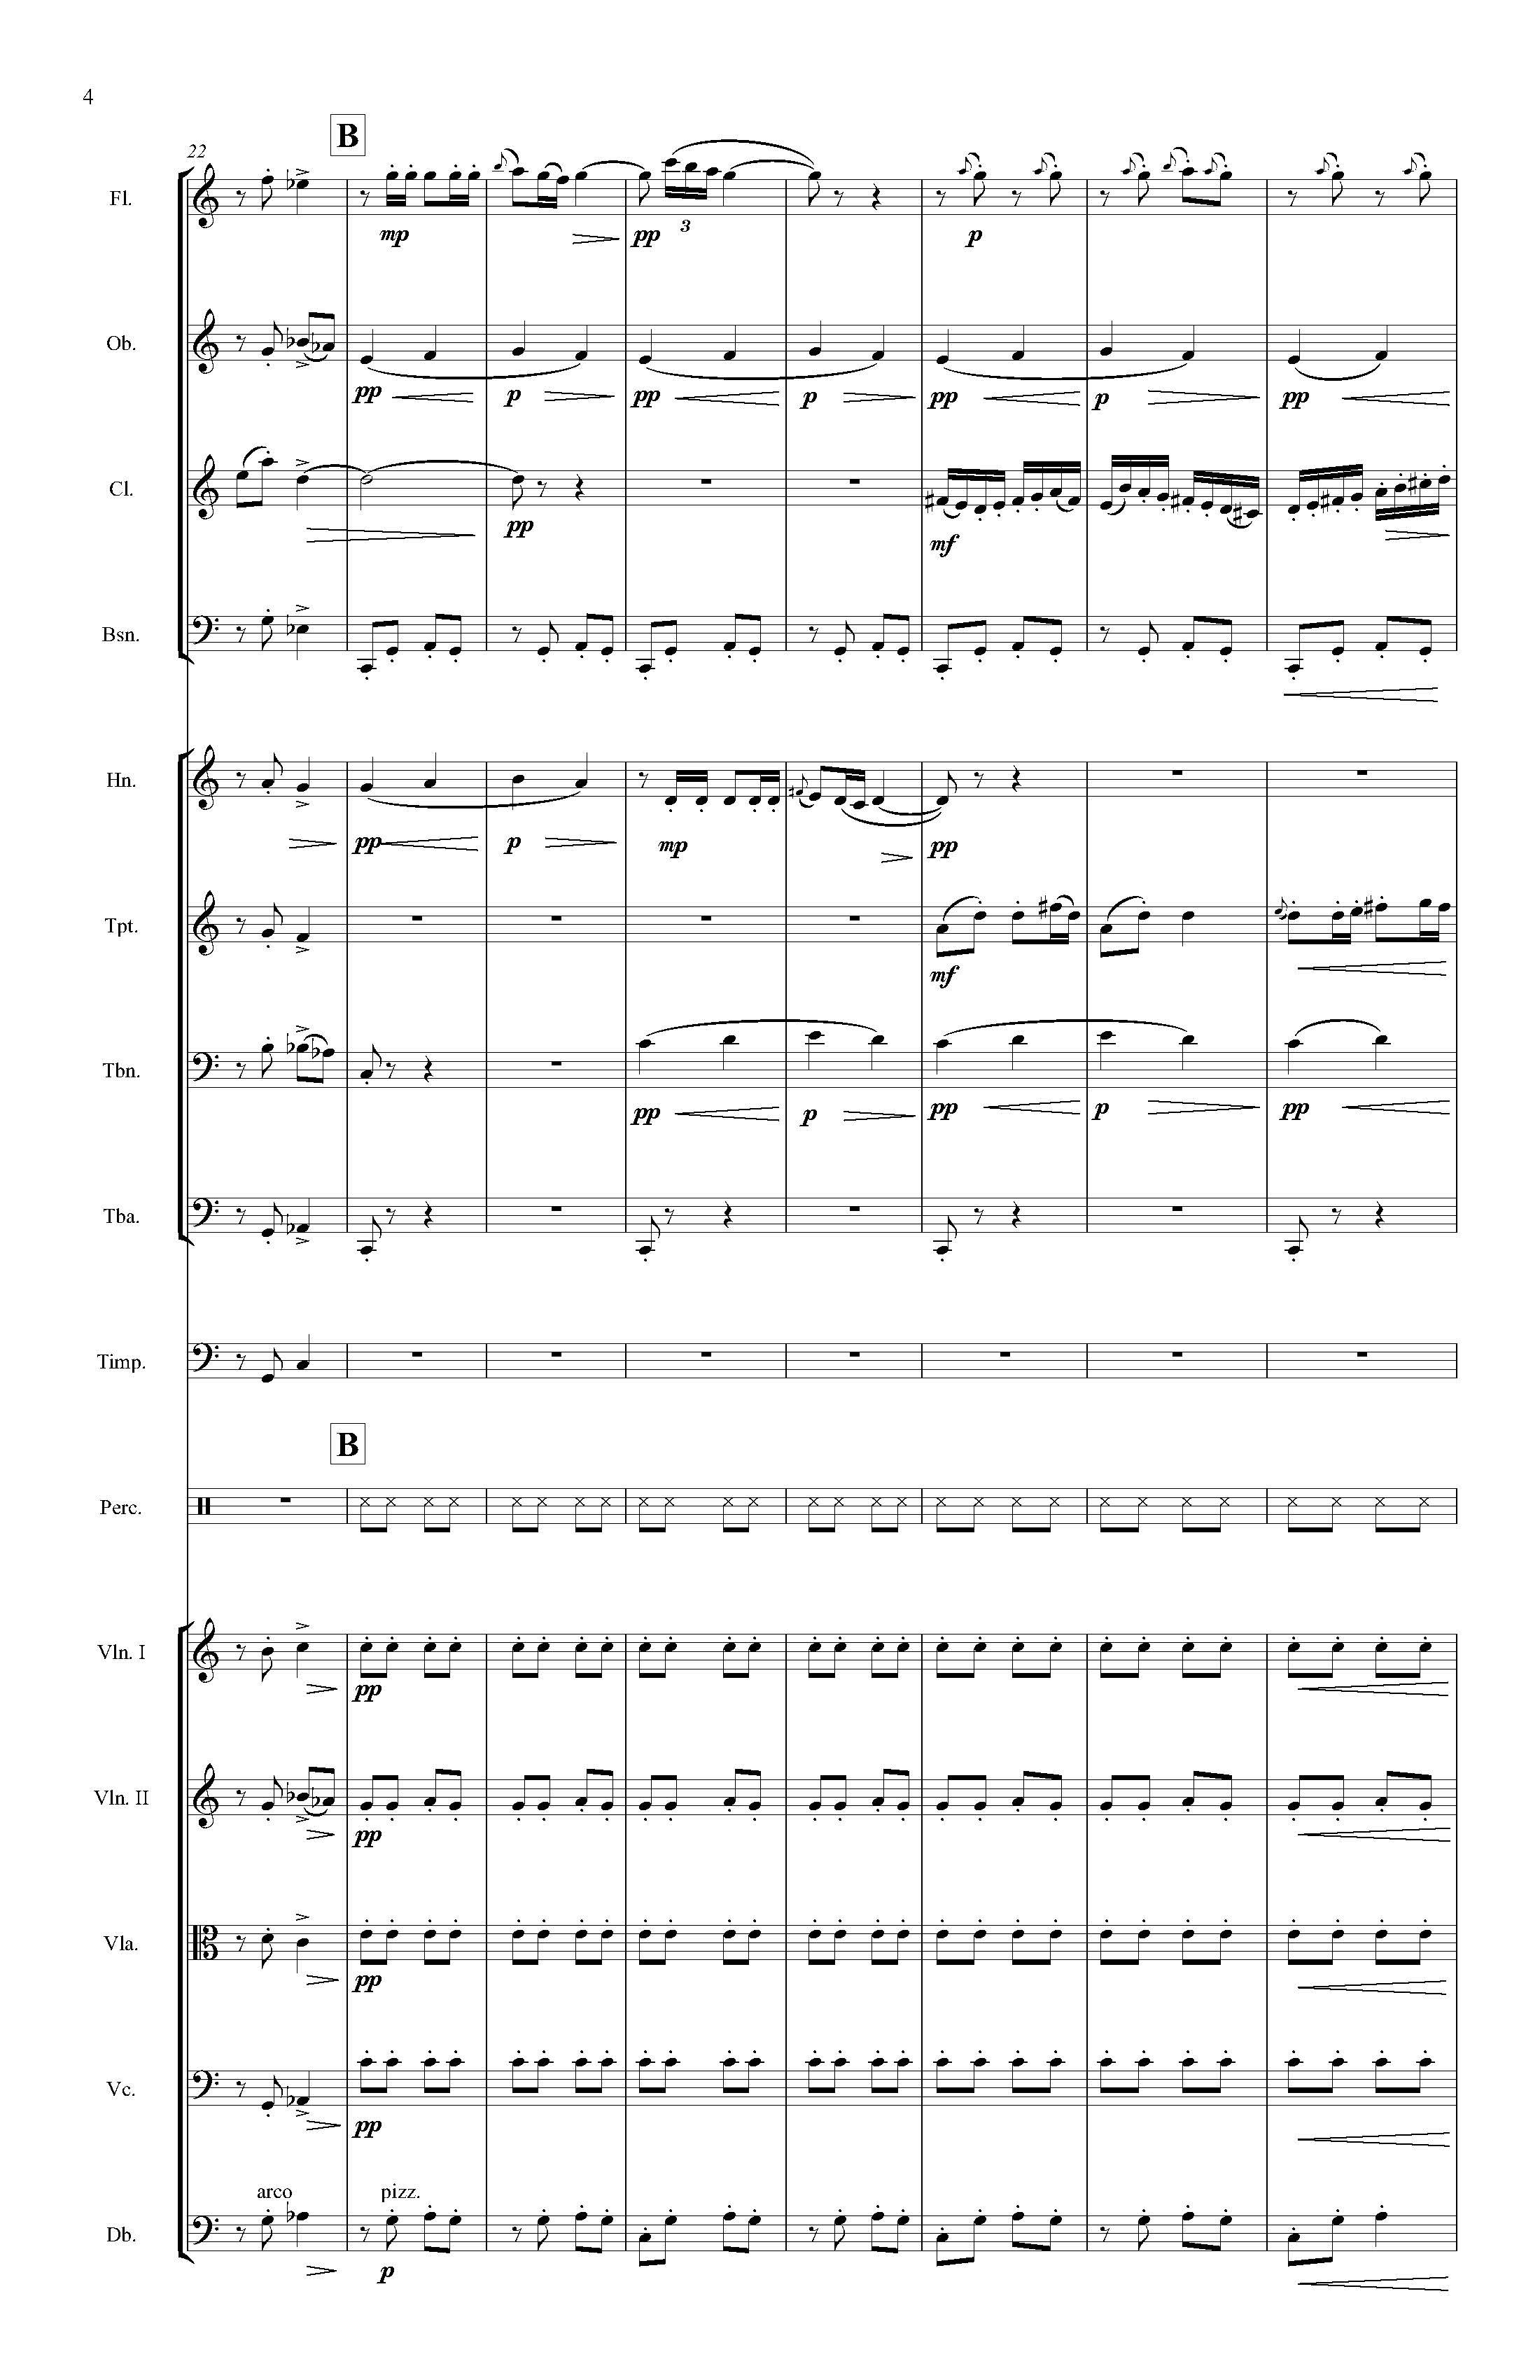 Fantasy on a French Carol - Complete Score_Page_08.jpg